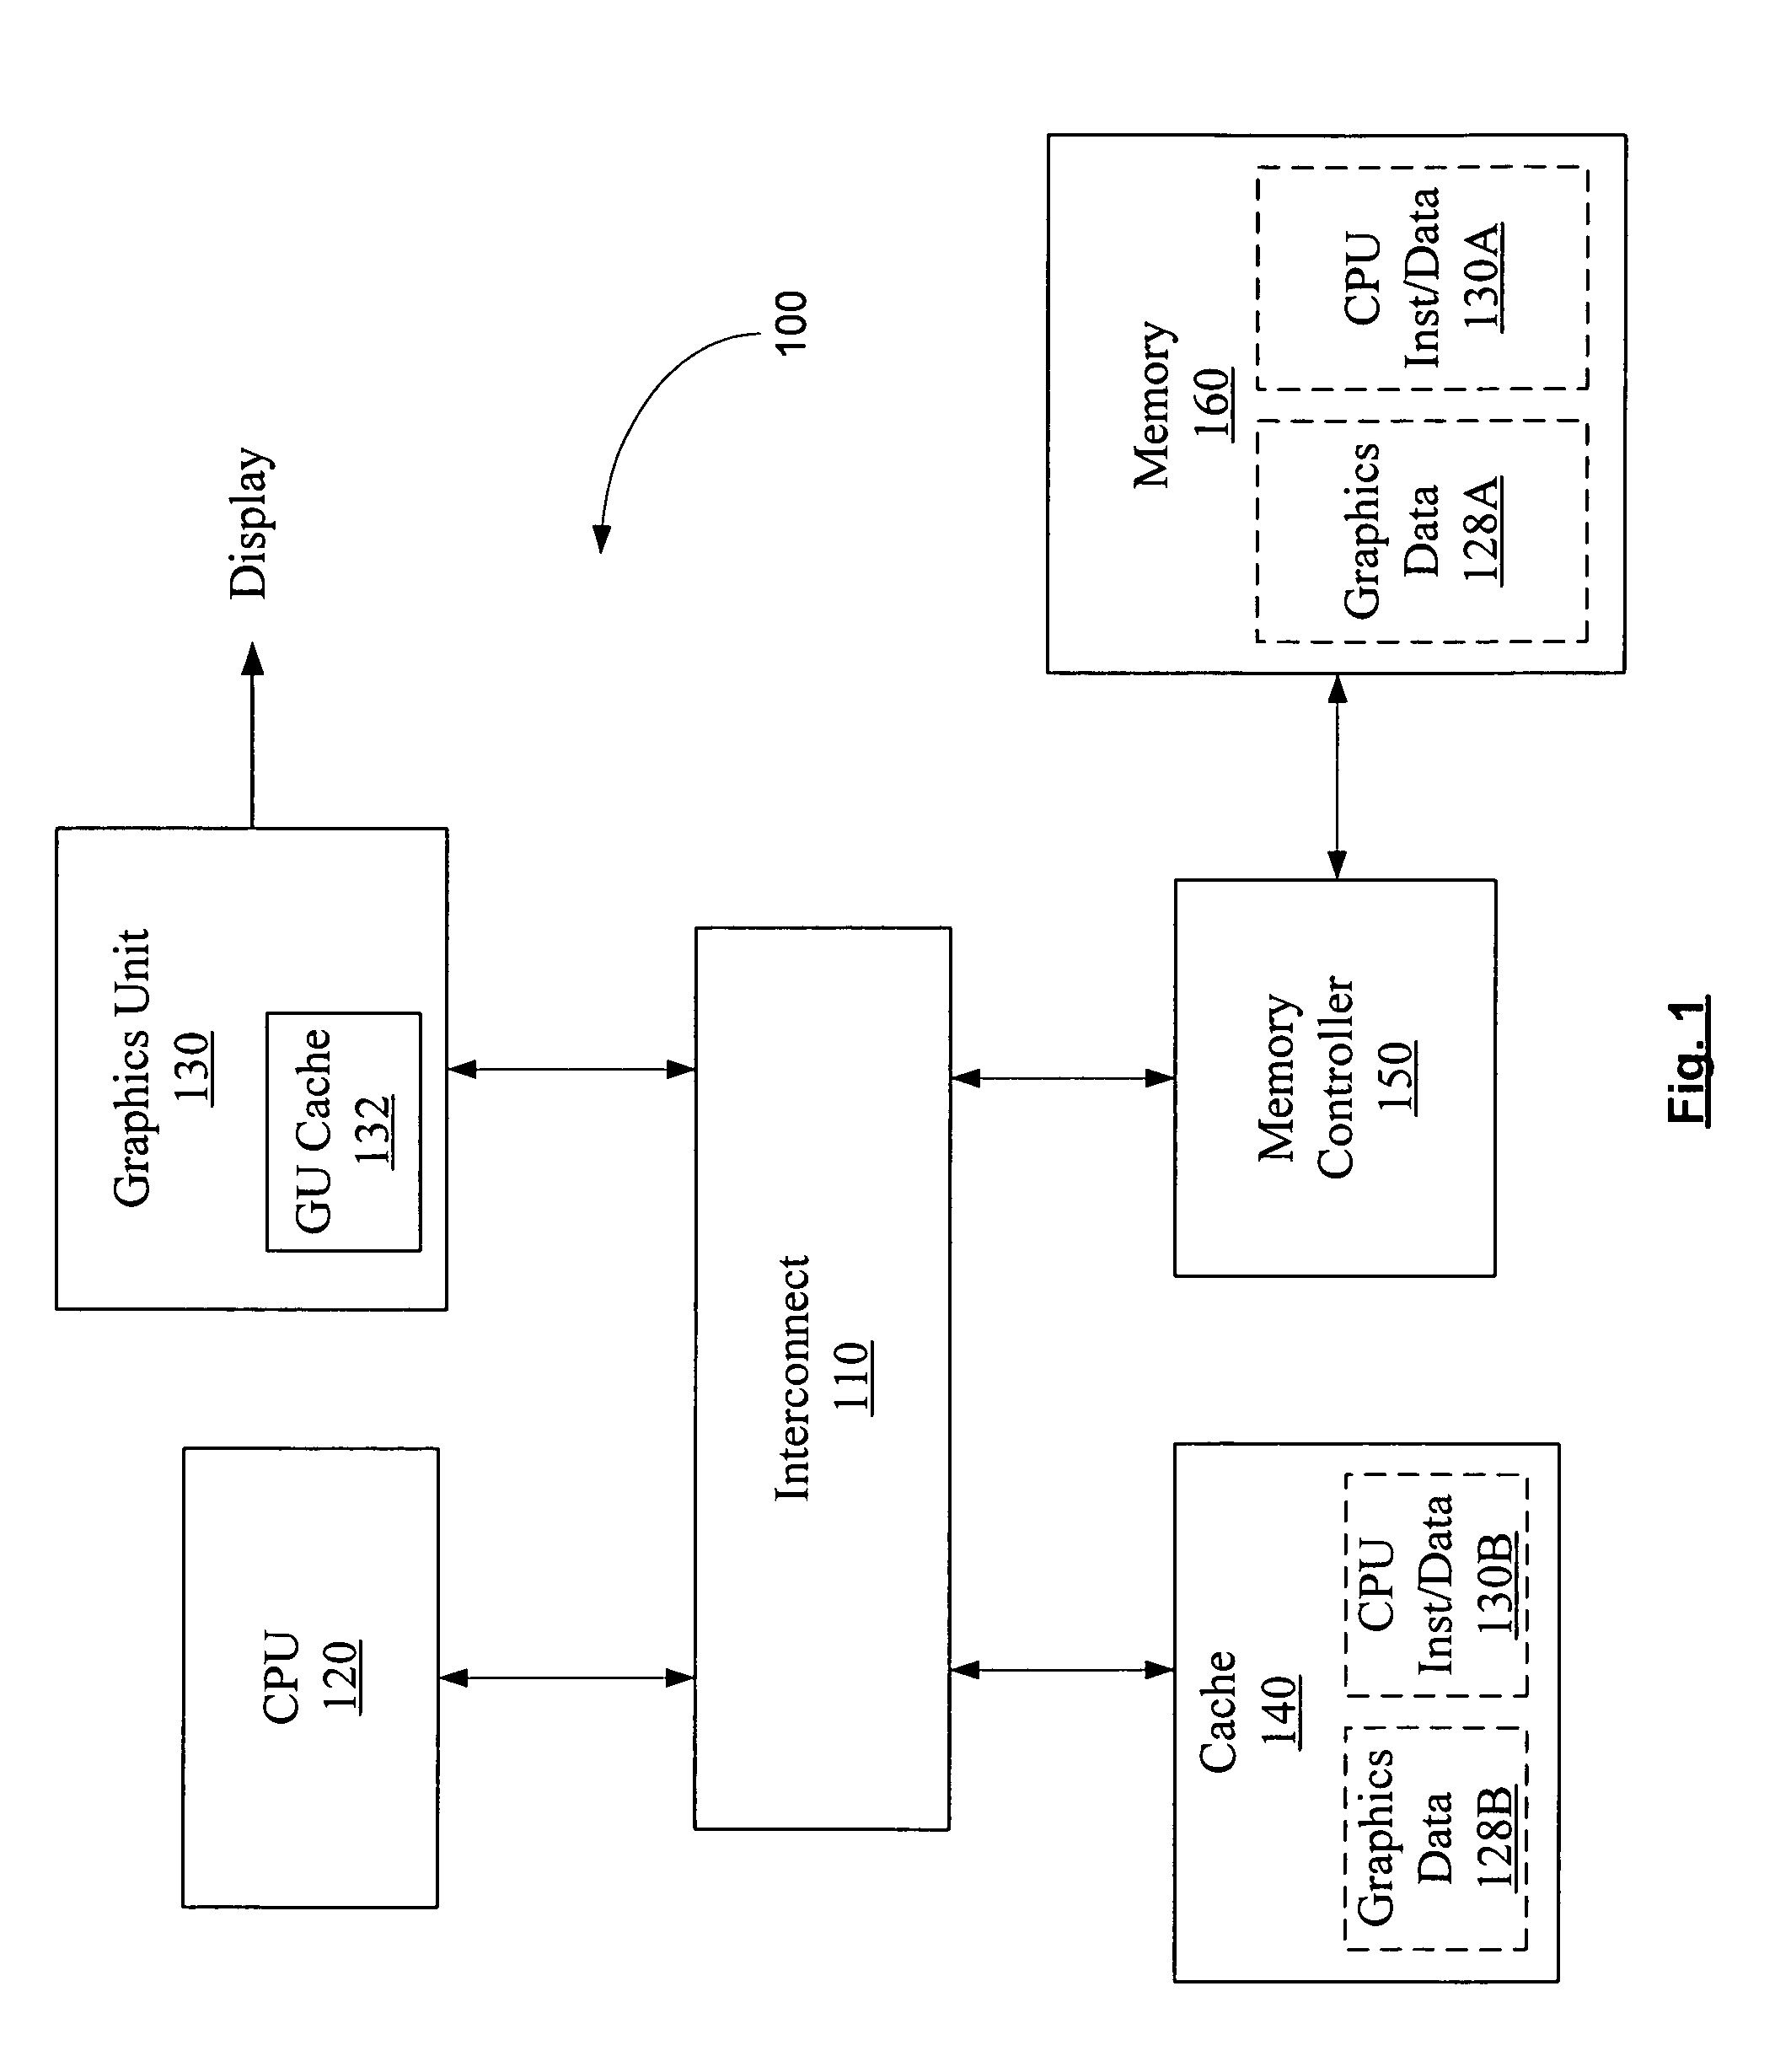 CPU and graphics unit with shared cache